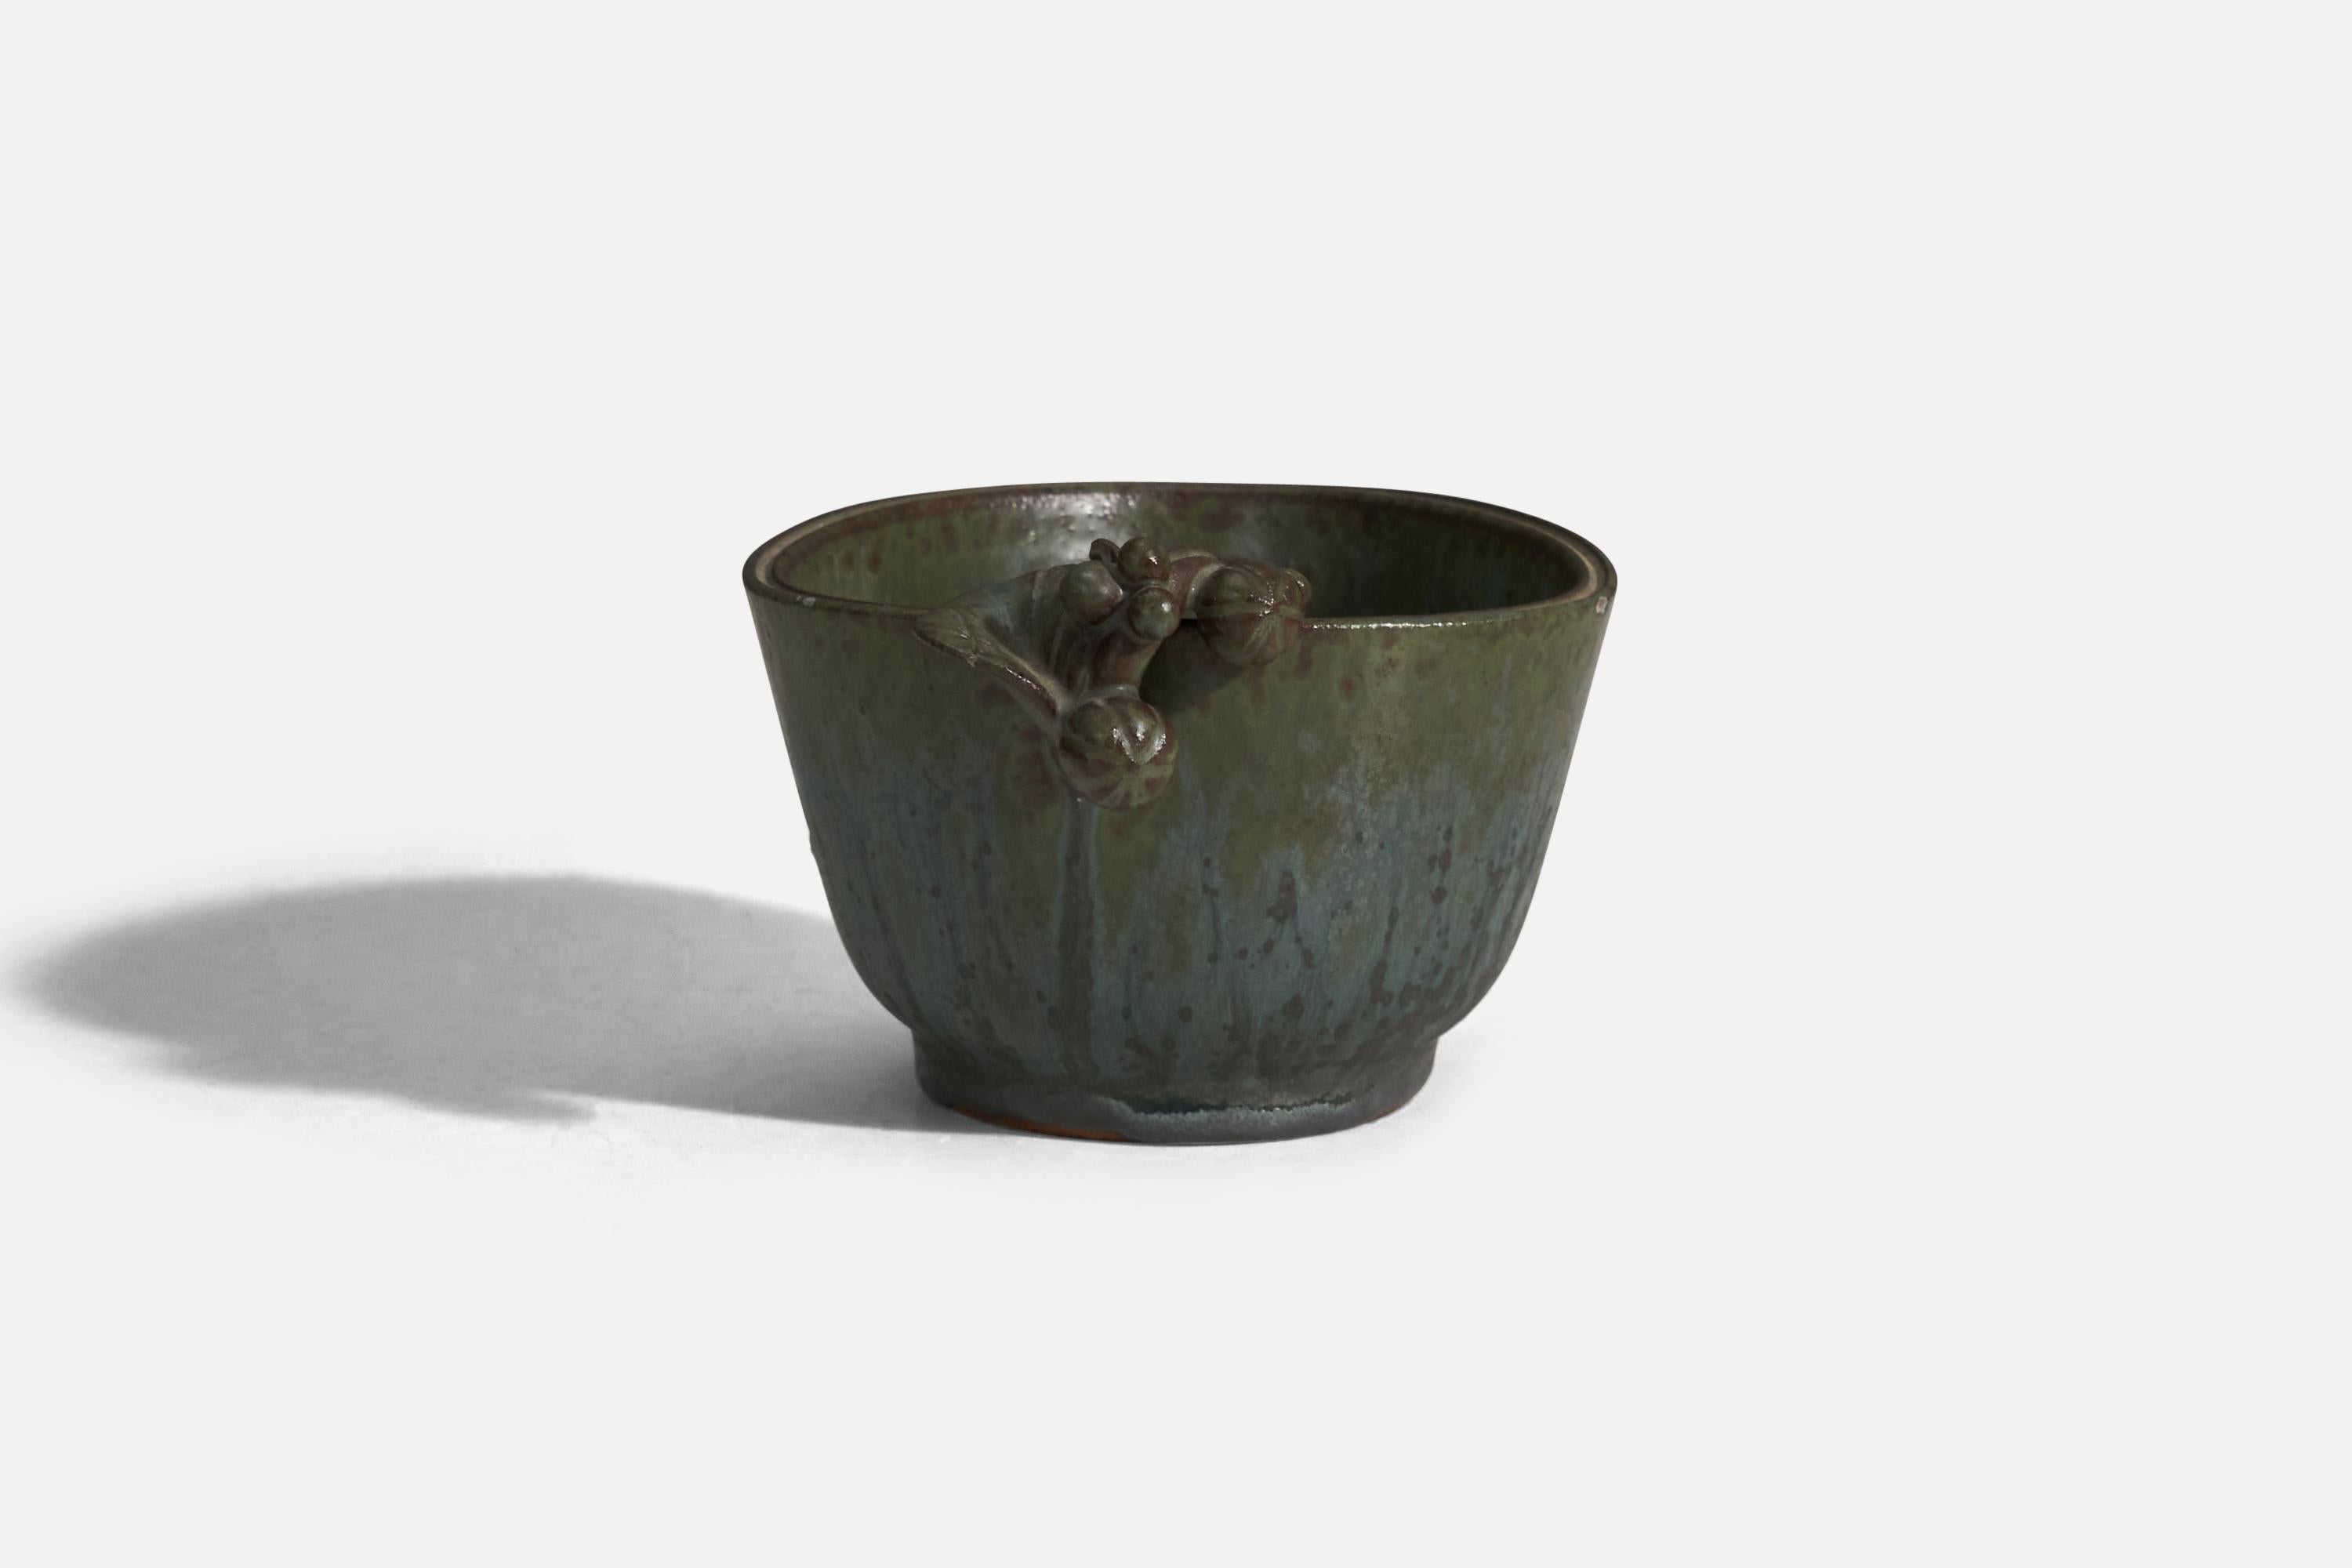 A grey and blue glazed stoneware bowl designed and produced by Arne Bang, Denmark, 1940s.